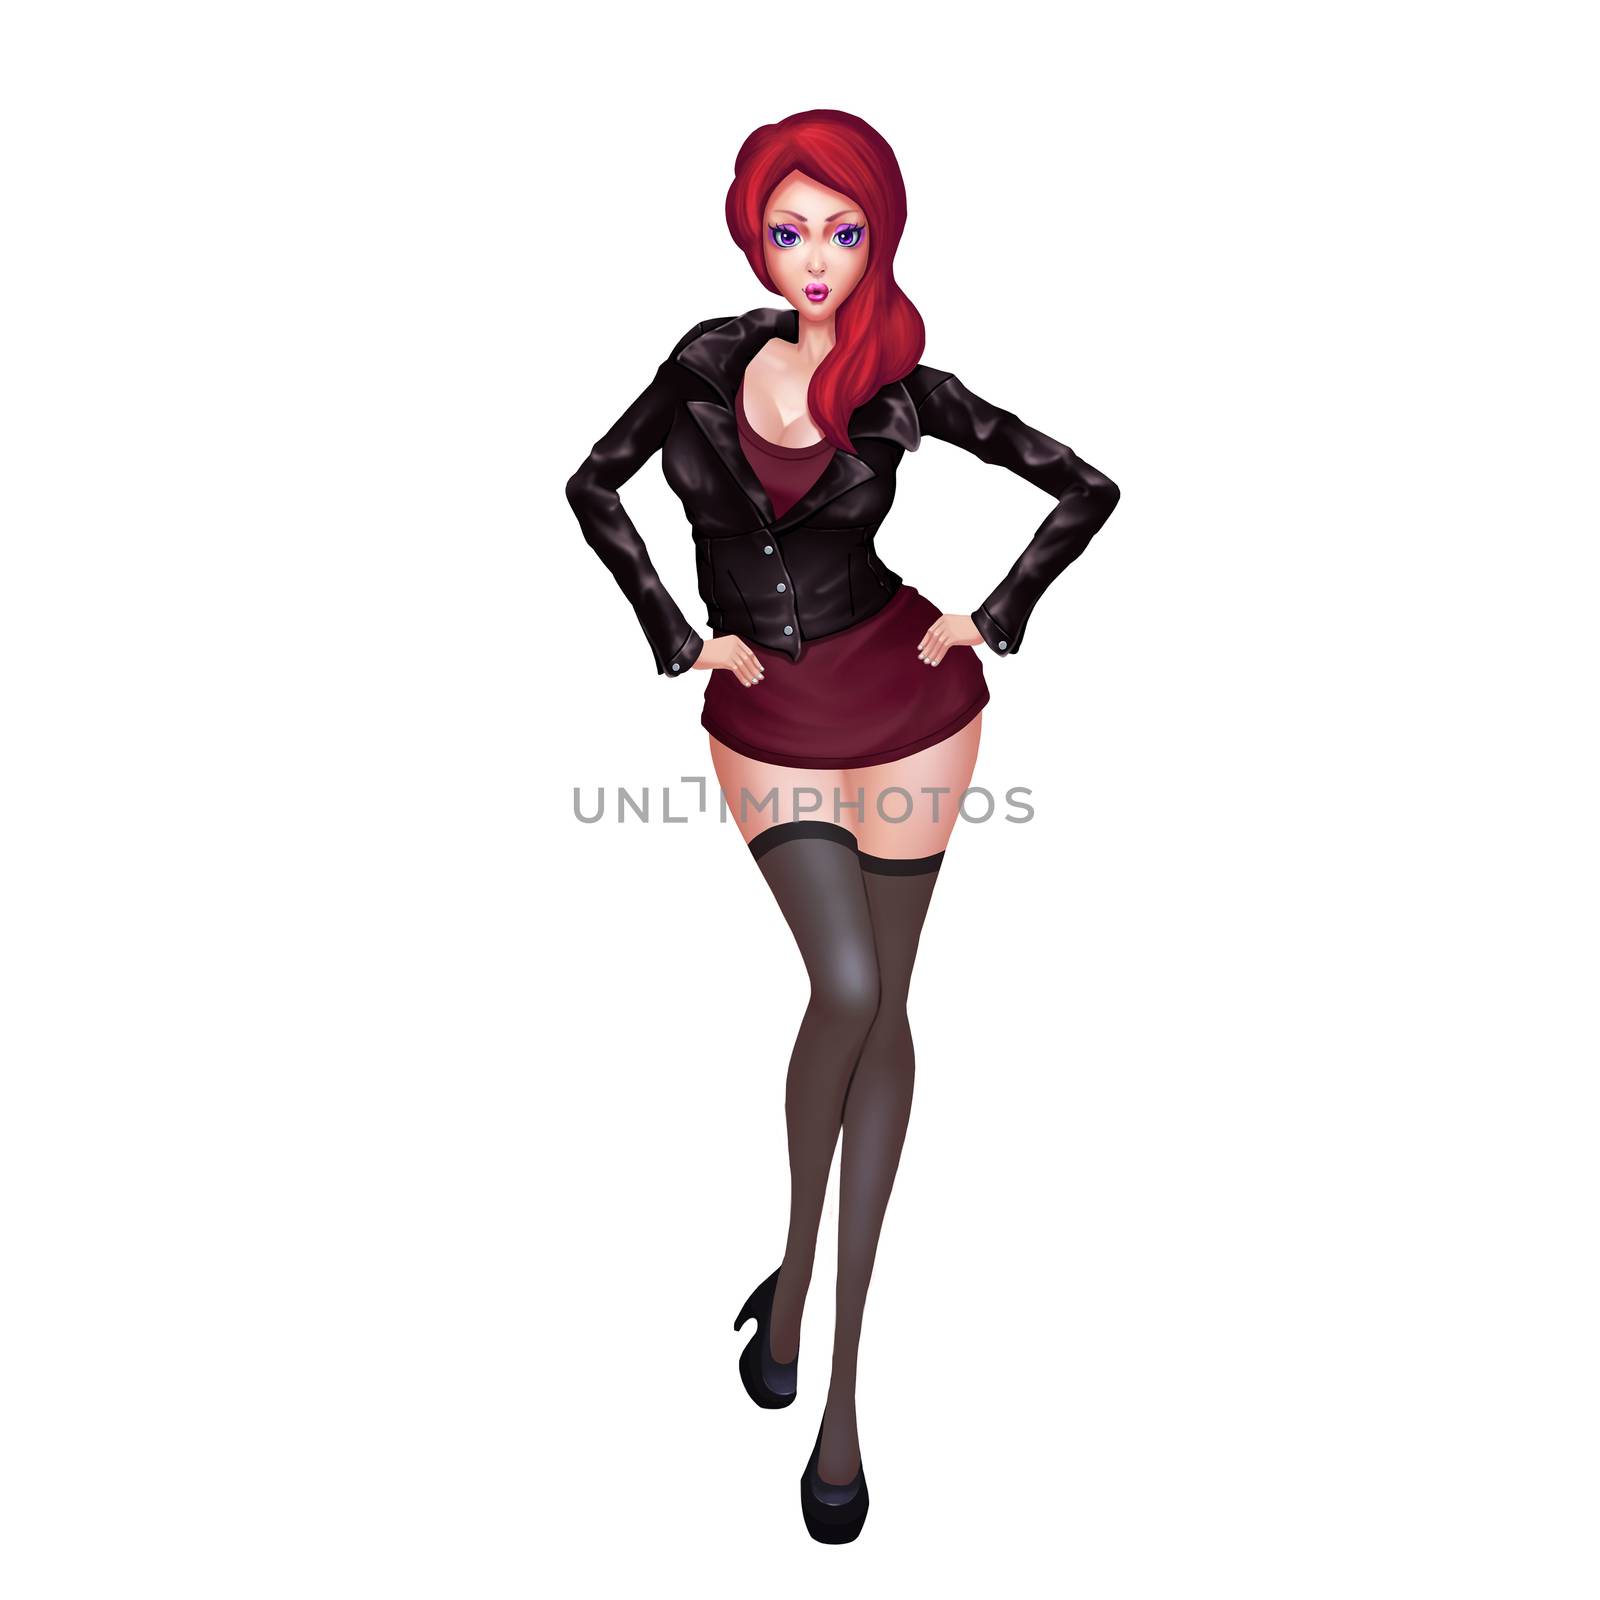 High Definition Illustration: Seductive Woman with Fewer and Fewer Clothes Series 1. Realistic Cartoon Style Character Design.